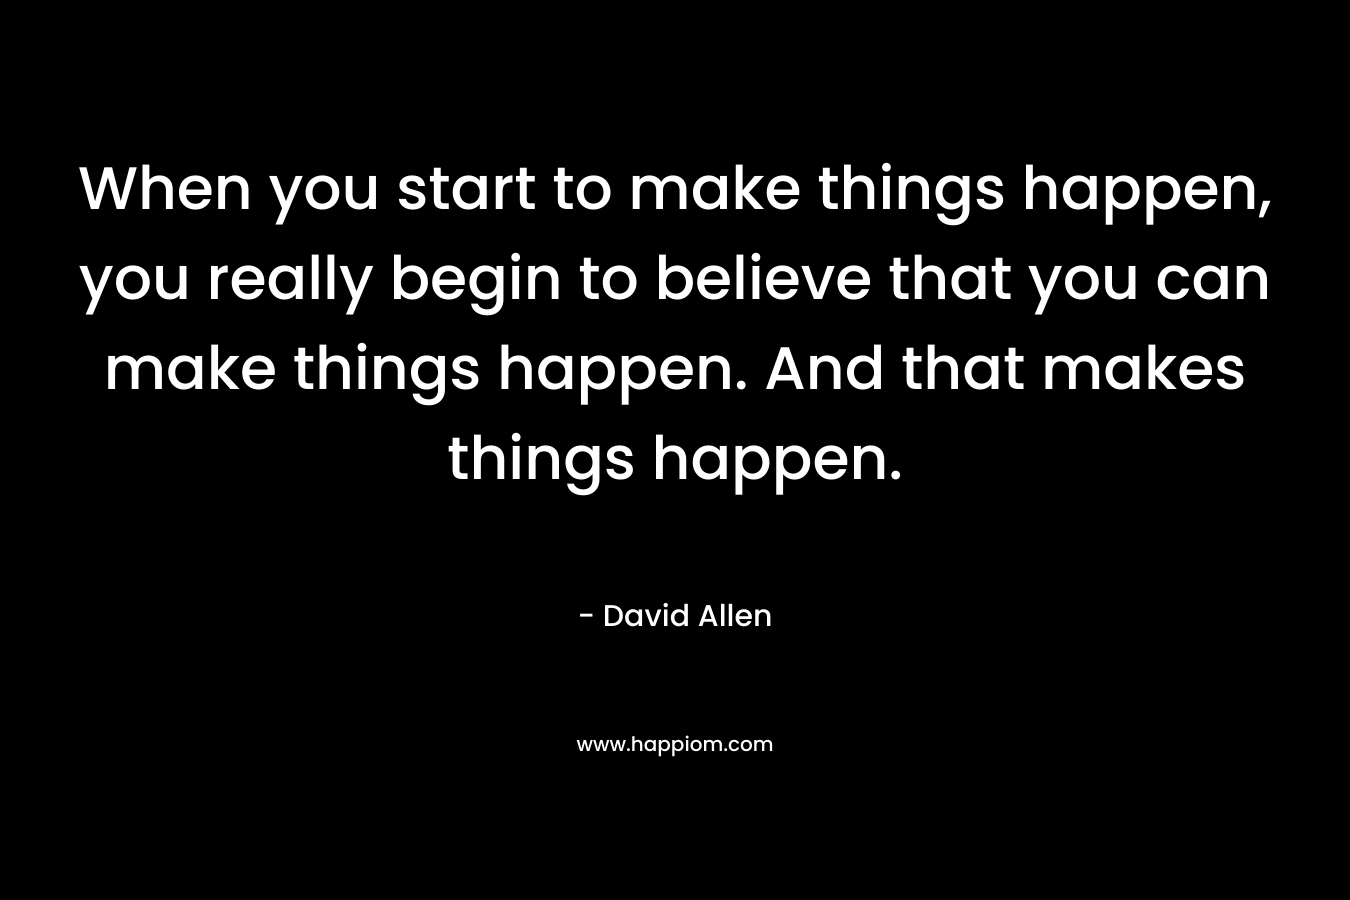 When you start to make things happen, you really begin to believe that you can make things happen. And that makes things happen.